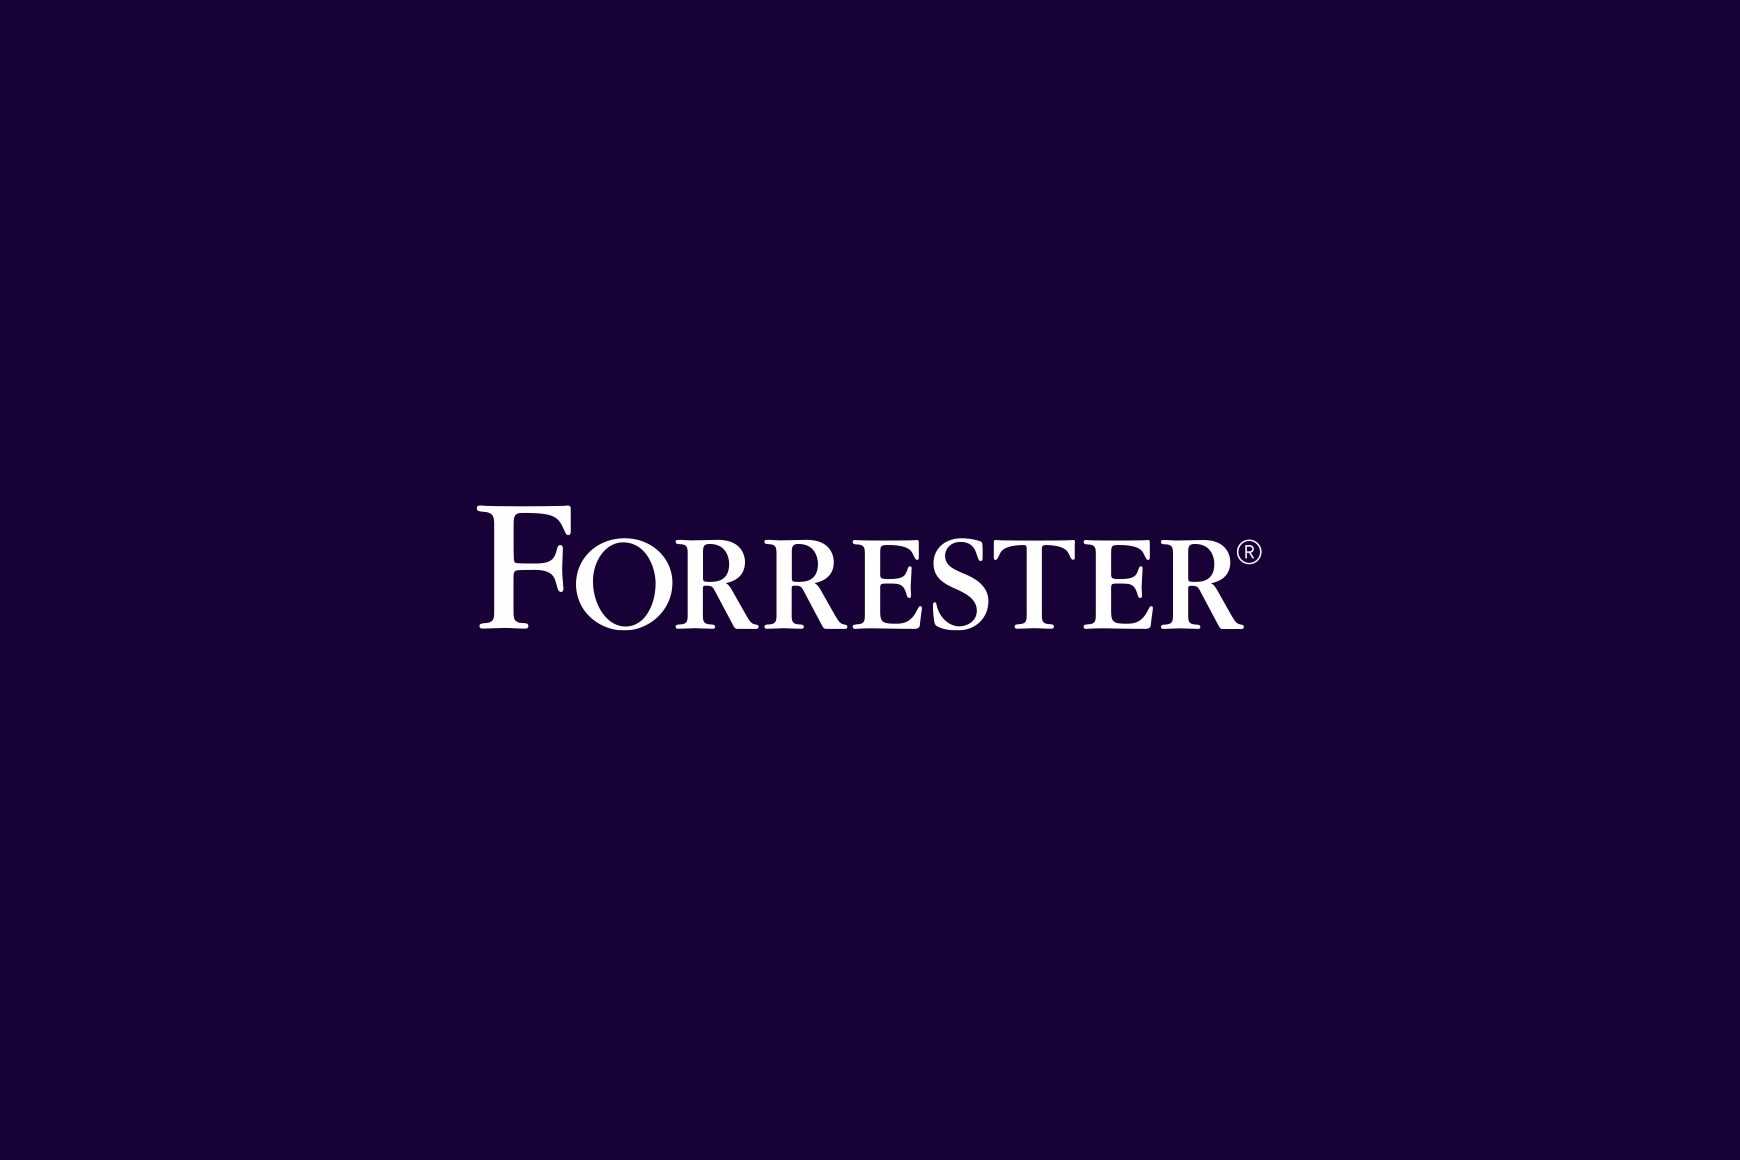 Talkdesk named Leader in 2020 Forrester Wave for Contact Center as a Service